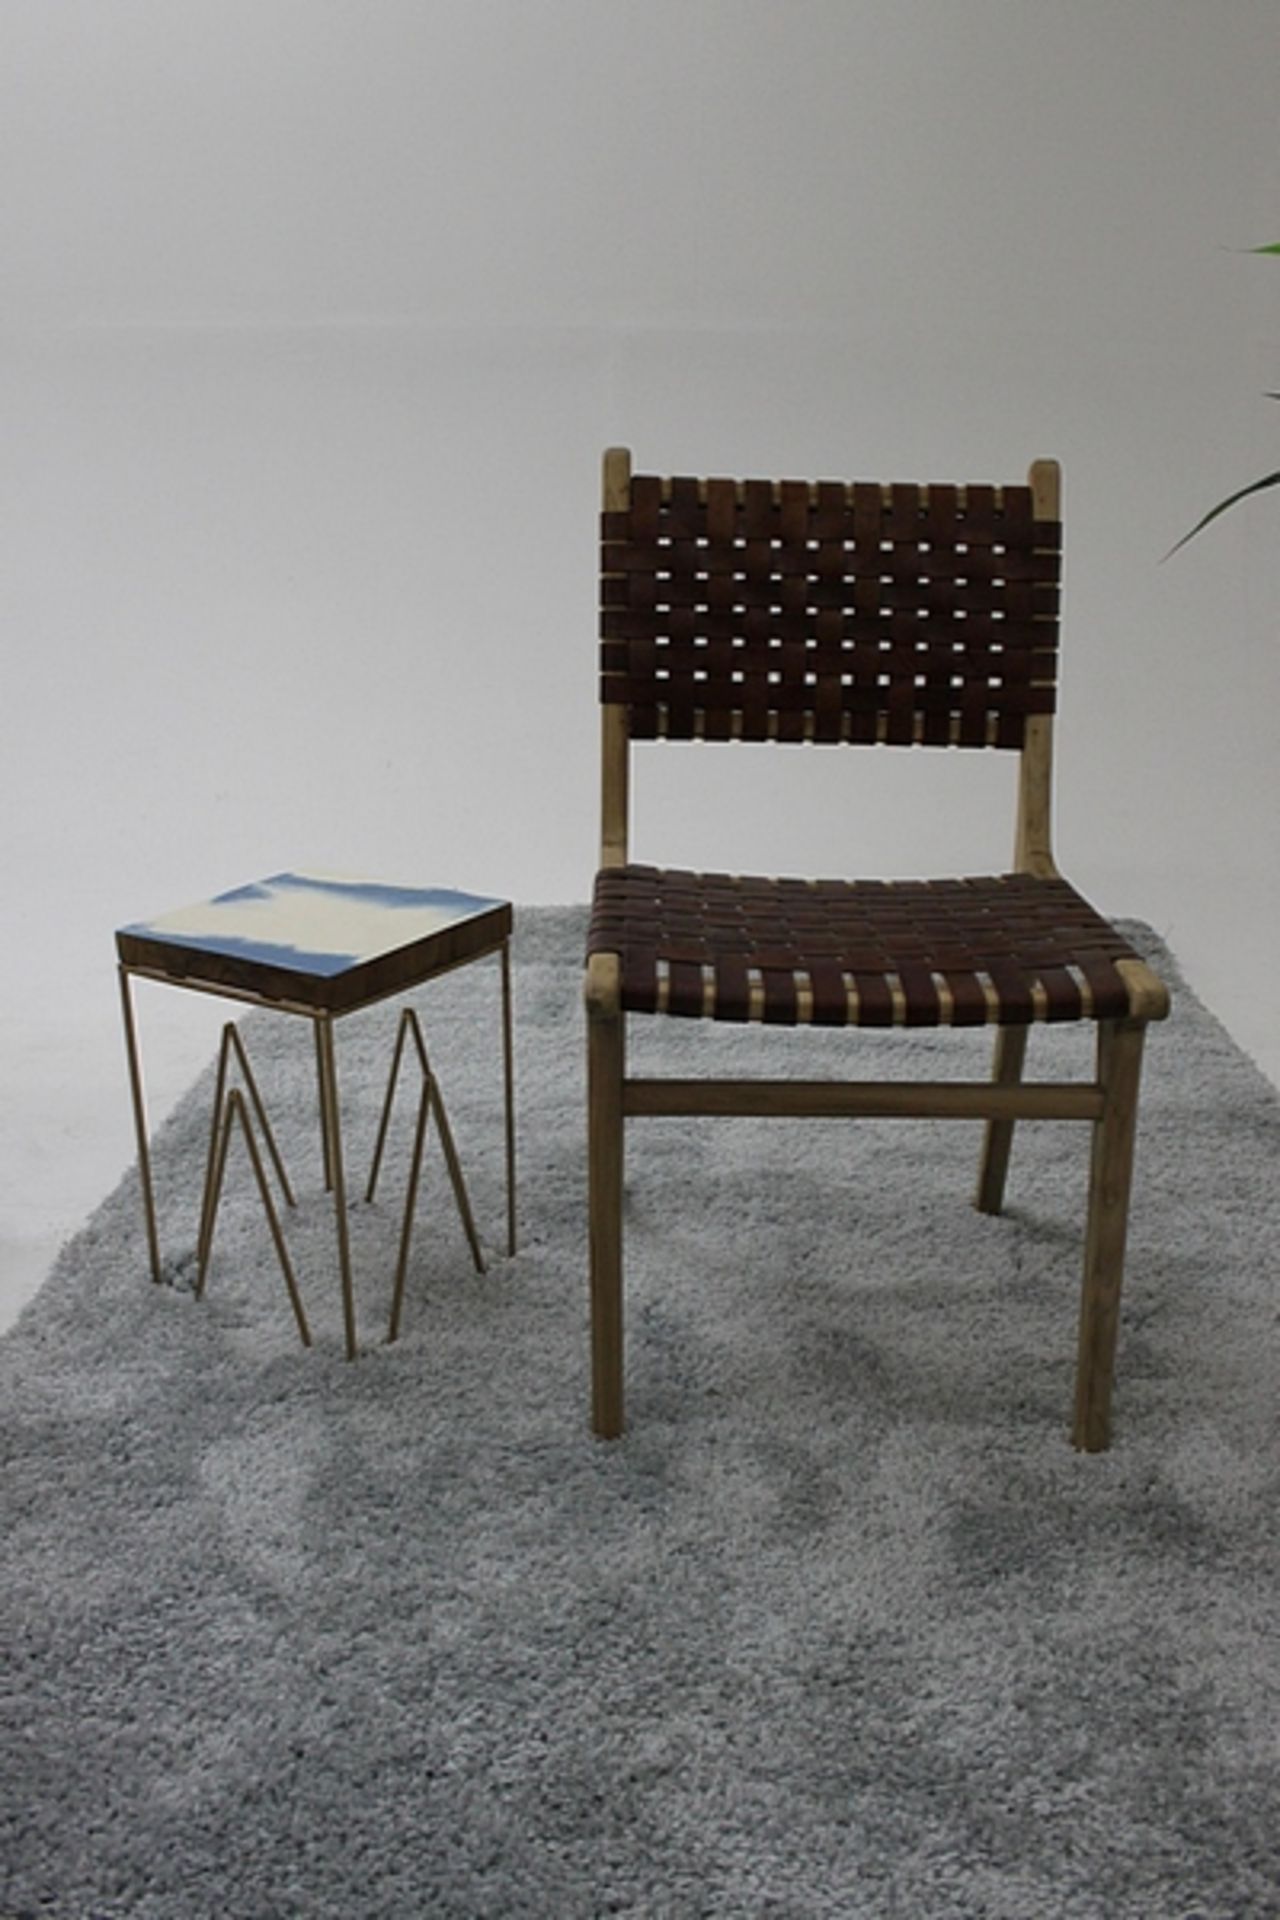 Tan Woven Strap Chair - Image 2 of 3